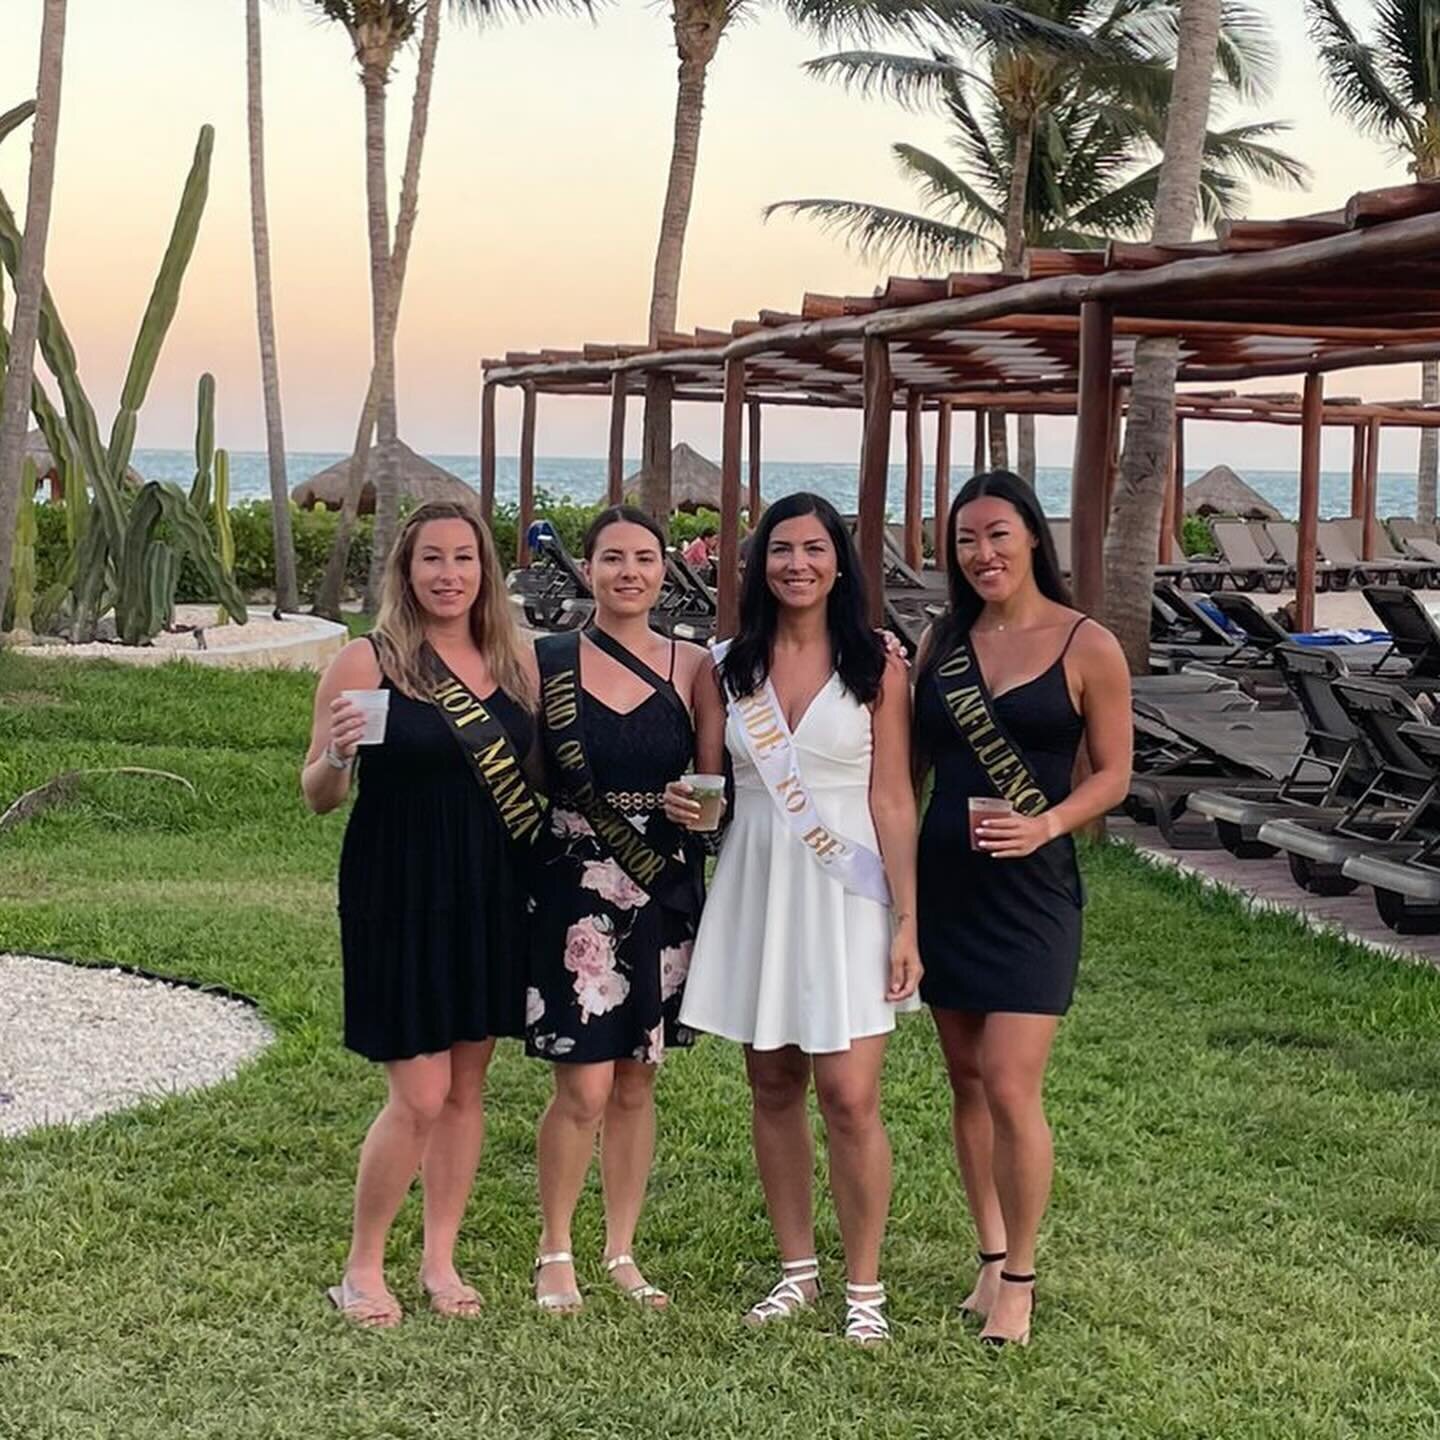 A trip to remember! 💗 Thank you to my girls for planning the most incredible bachelorette.